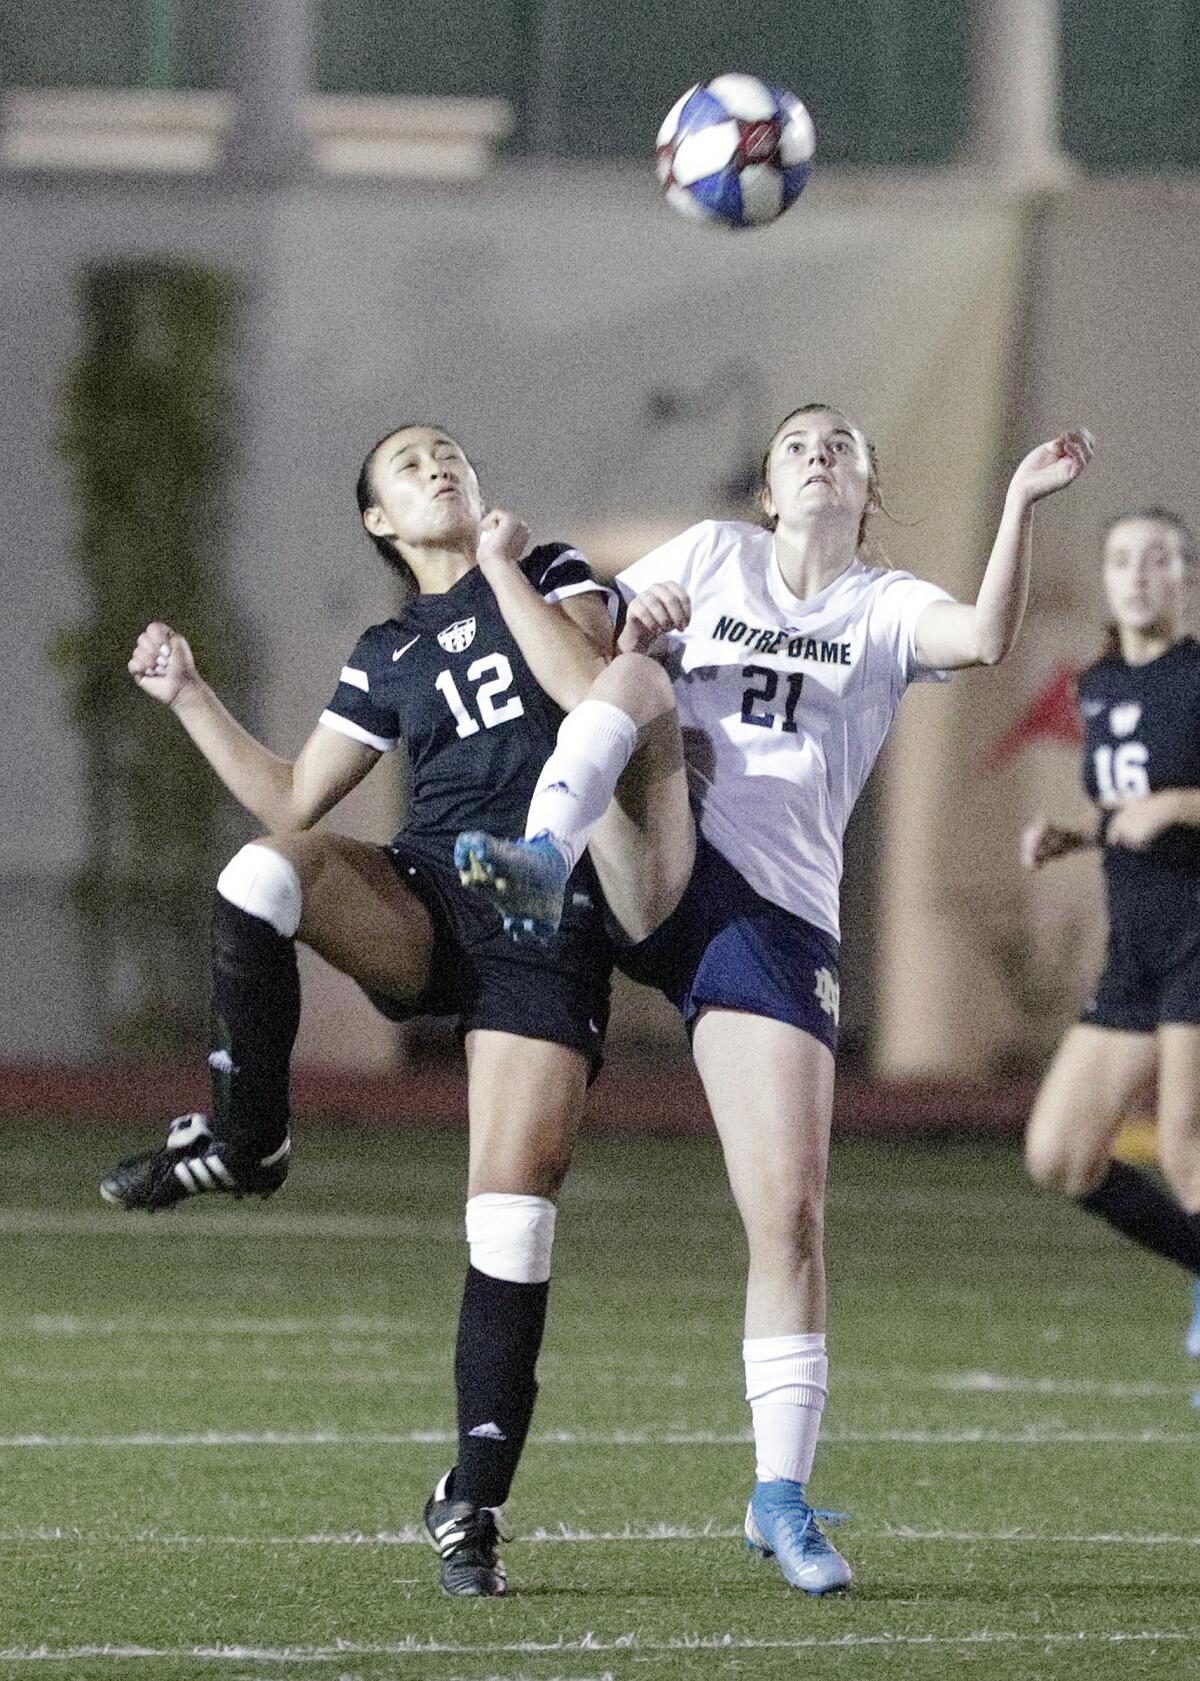 Flintridge Sacred Heart's Therese Daniels and Sherman Oaks Notre Dame's Mia Richardson reach to control the ball in a Mission League girls' soccer game Wednesday at Occidental College.